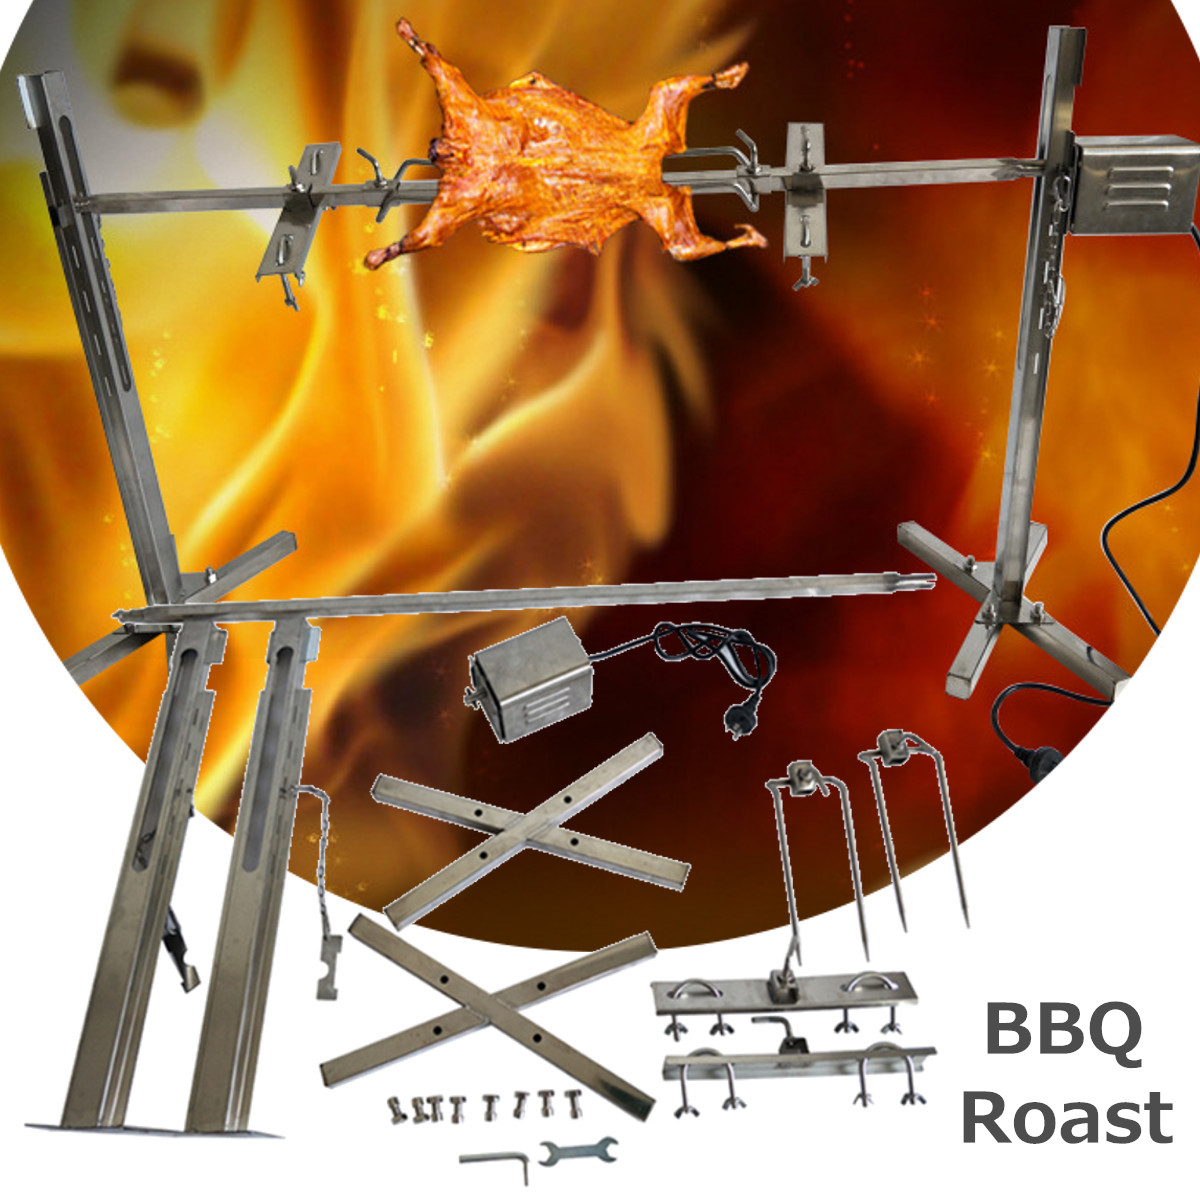 220V-15W-Stainless-Steel-Portable-Rotisserie-Grill-Spit-Tripod-BBQ-Lamb-Camping-Roaster-BBQ-Grill-1411901-1